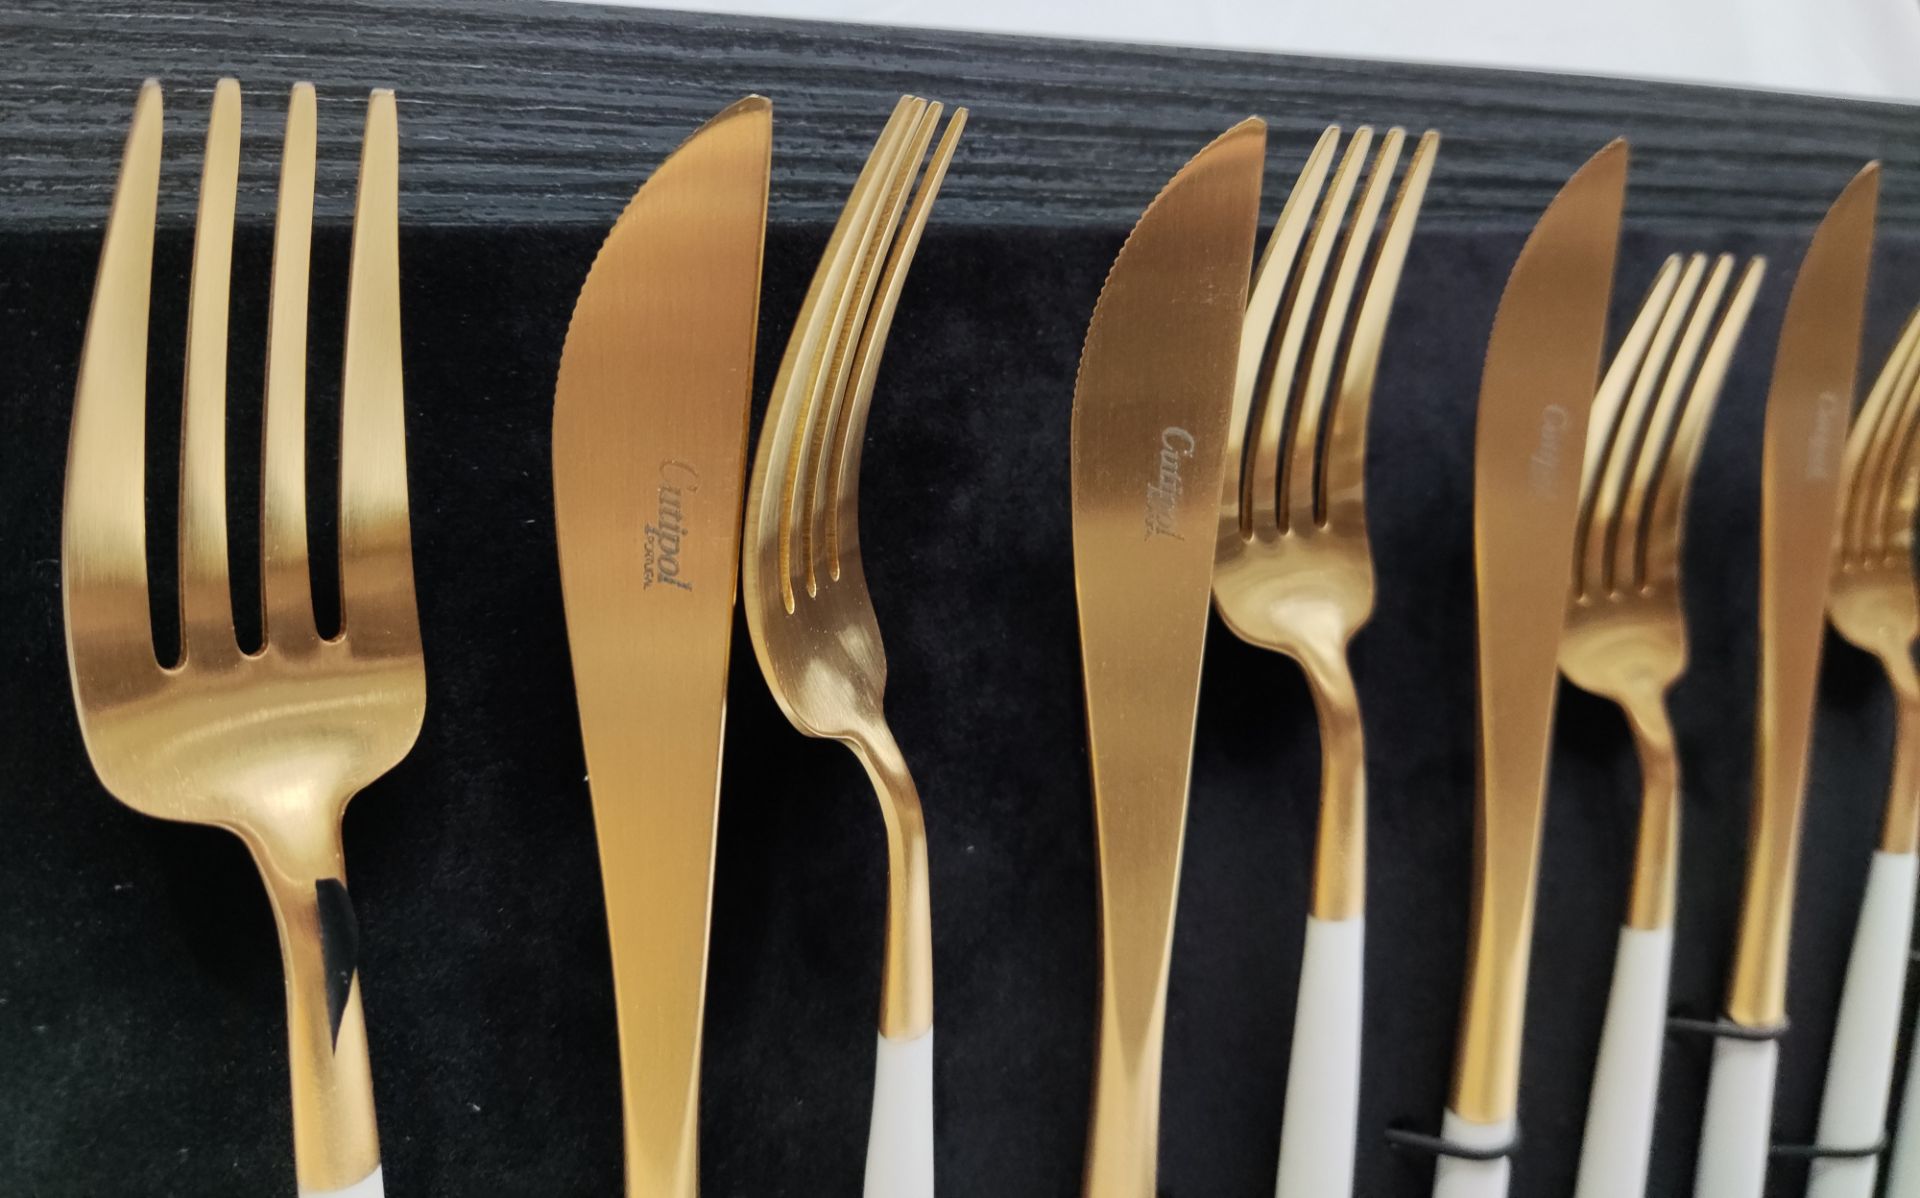 1 x CUTIPOL 'Goa' Luxury 24-Piece White/Gold Cutlery Set - New/Boxed - Original RRP £499.00 - Image 6 of 24